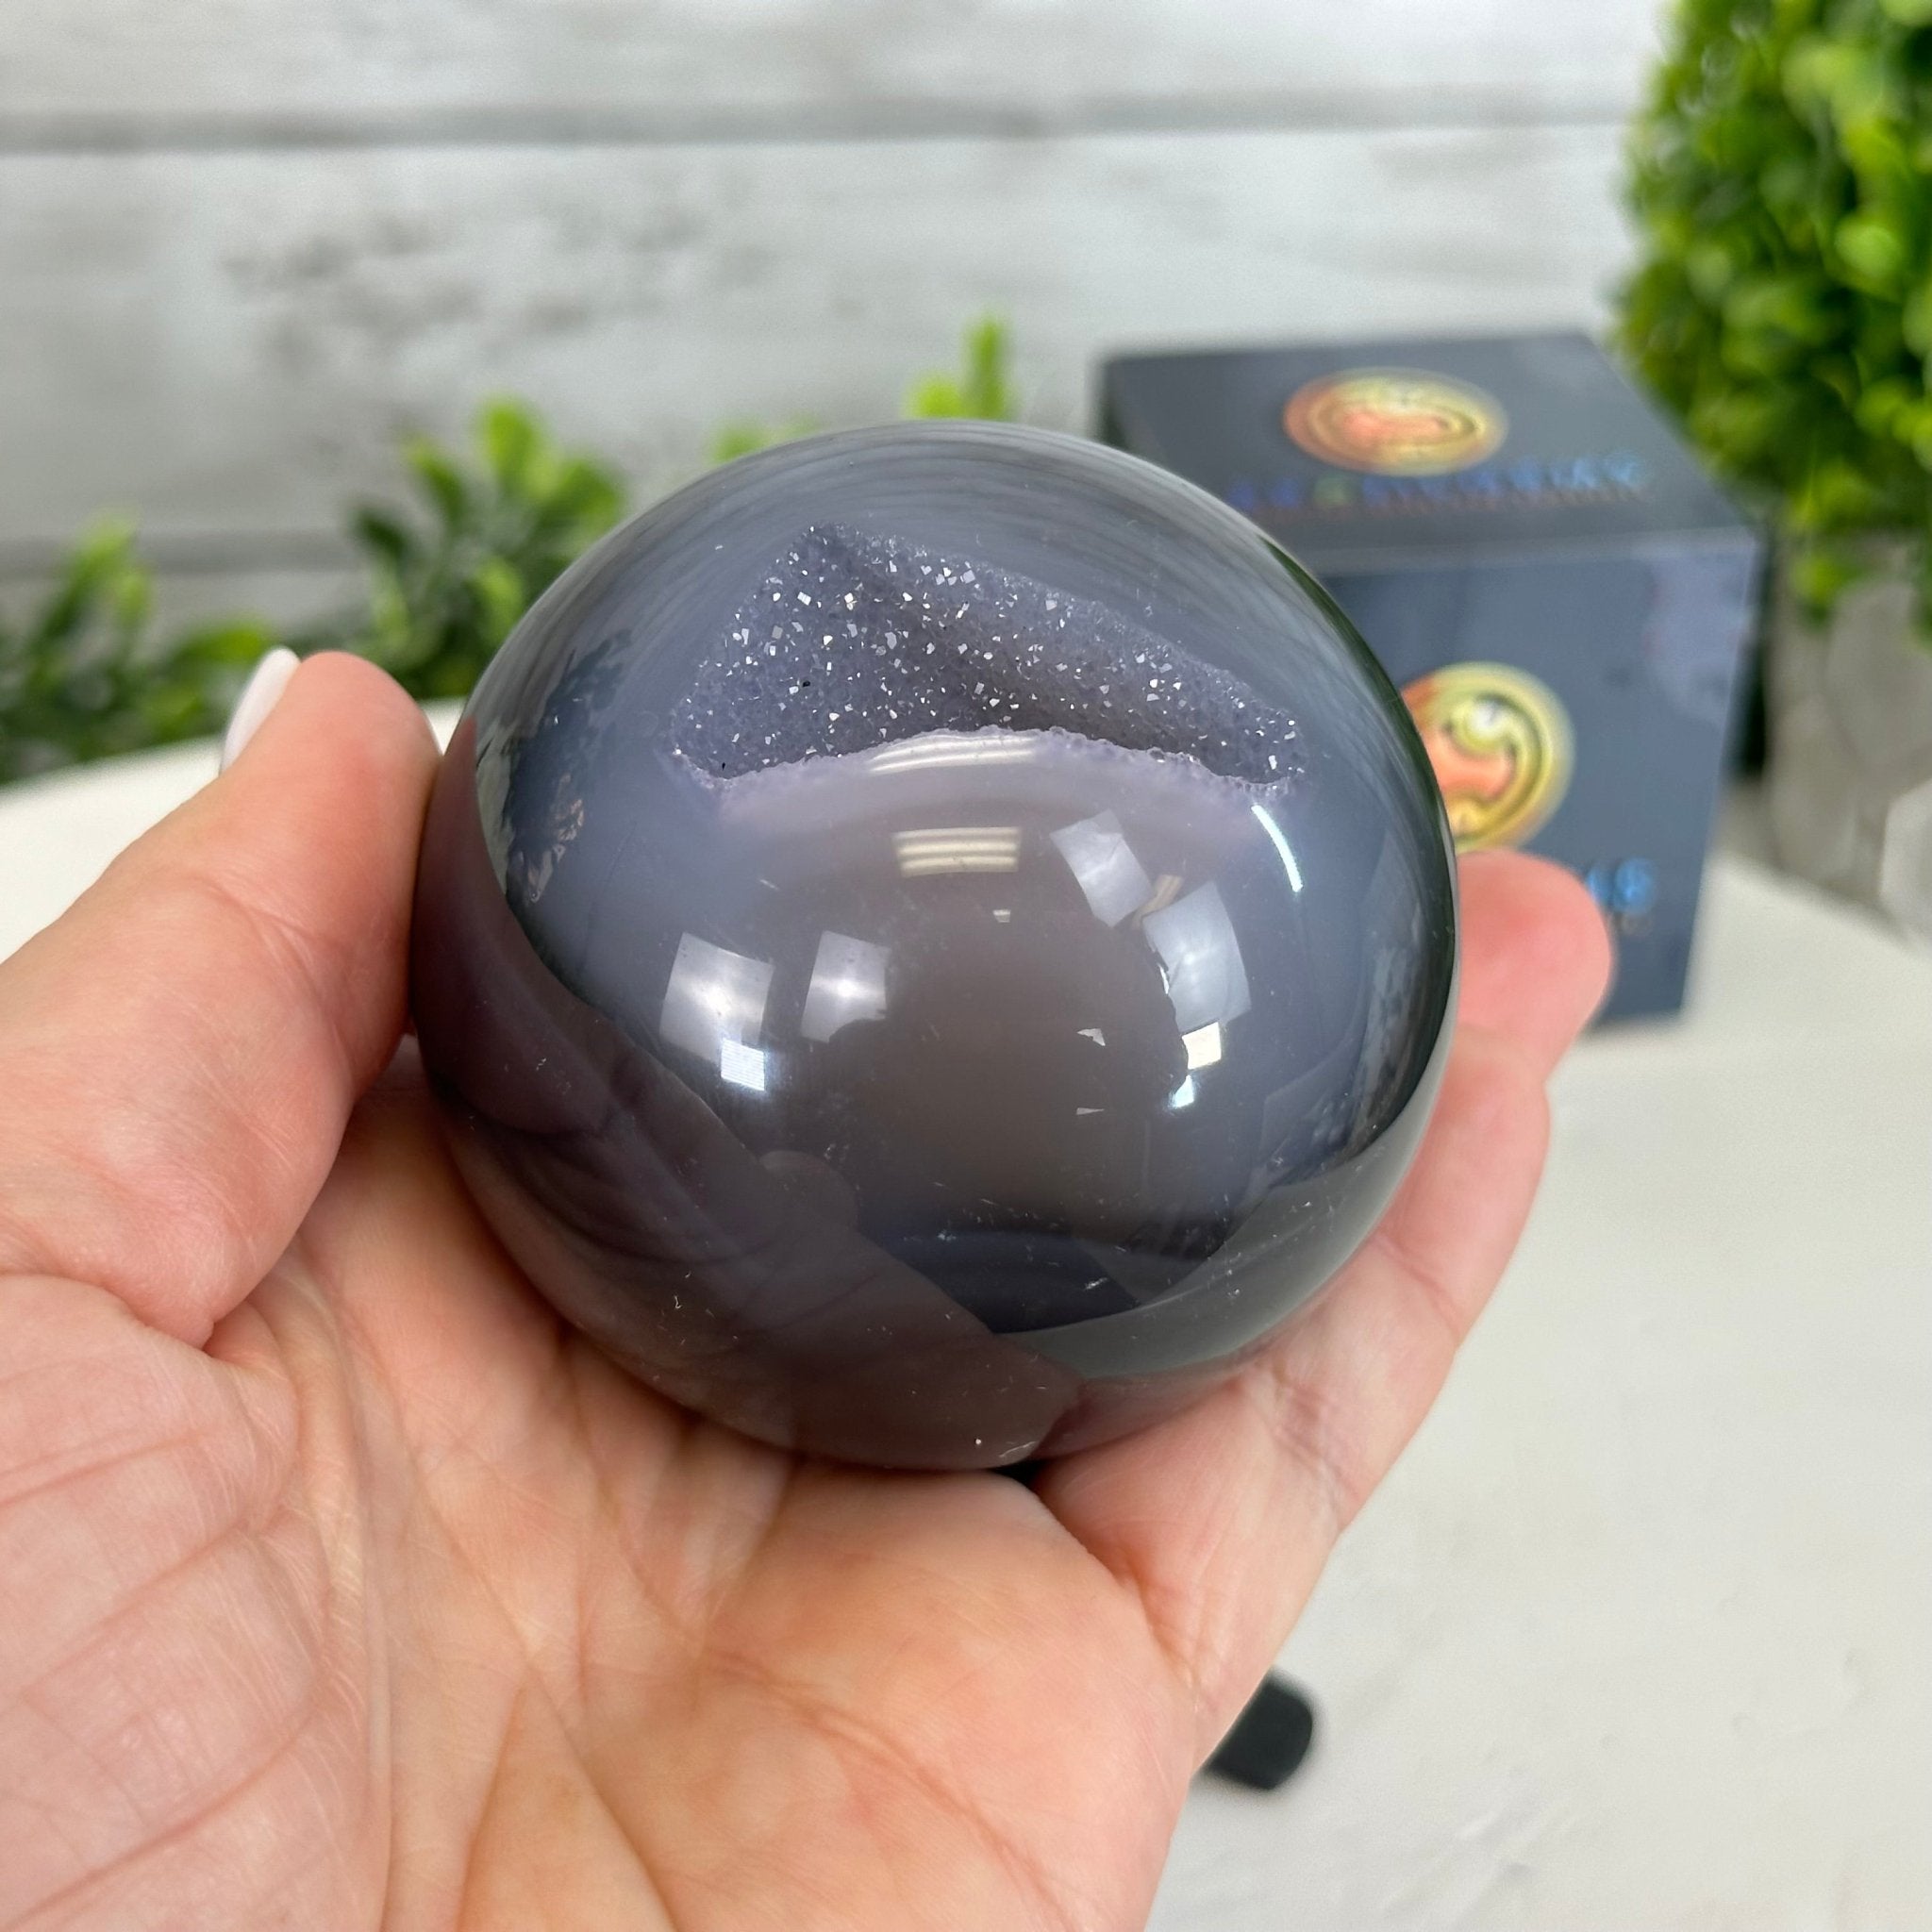 Druzy Agate Sphere on a Metal Stand, 0.9 lbs & 6.3" Tall #5634-0003 - Brazil GemsBrazil GemsDruzy Agate Sphere on a Metal Stand, 0.9 lbs & 6.3" Tall #5634-0003Spheres5634-0003